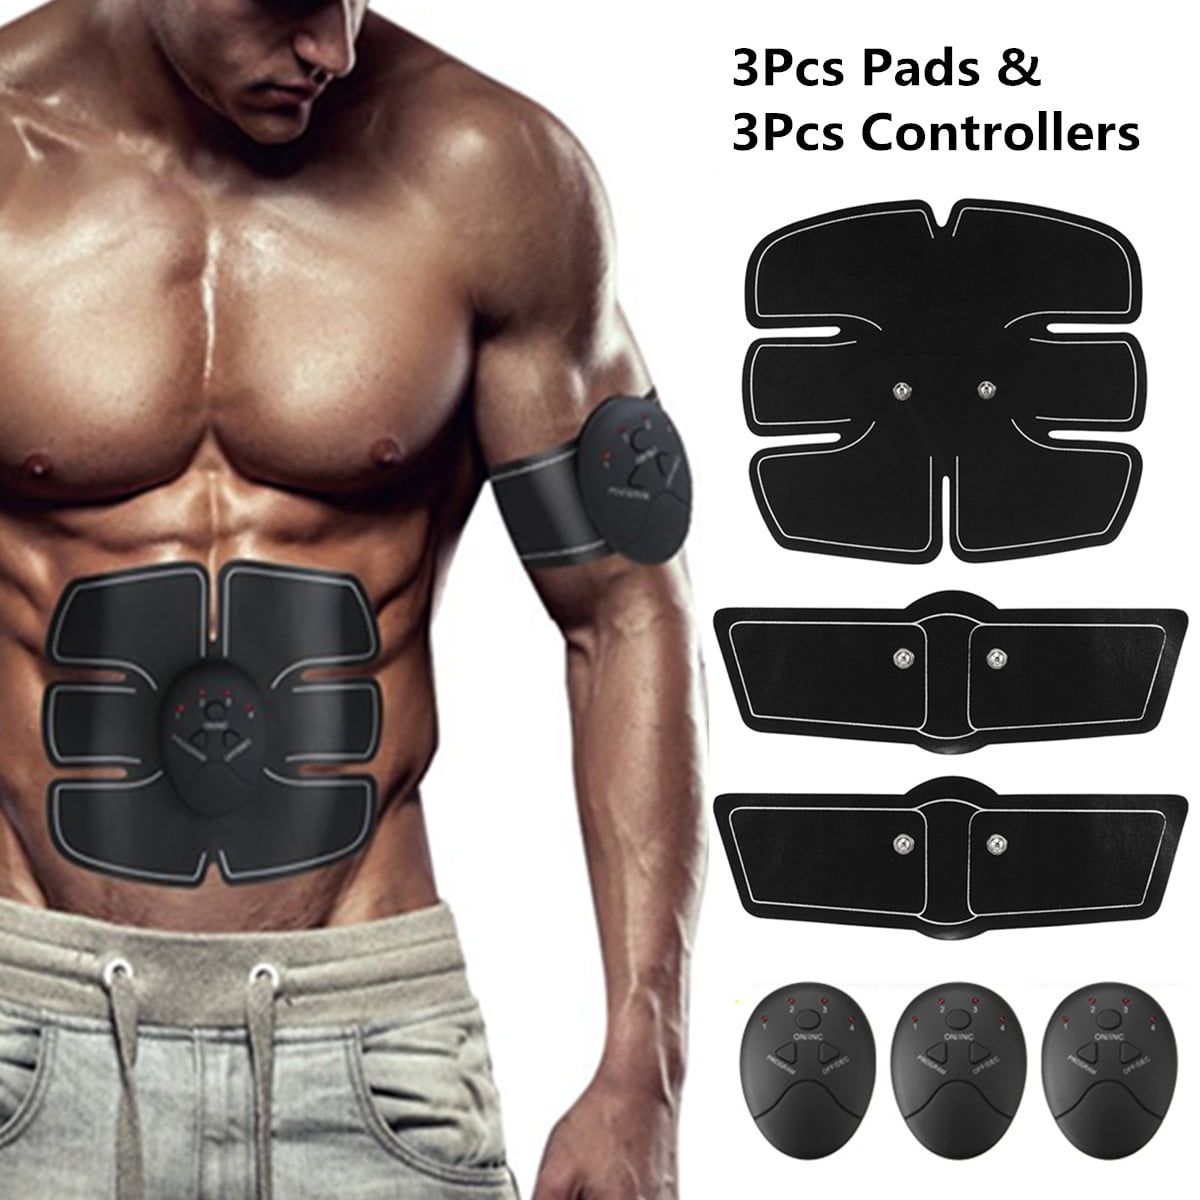 Abs Trainer Fitness Training Gym Workout Machine For Men & Women Tenswall EMS Muscle Stimulator Ab Belt Toning with USB Rechargeable